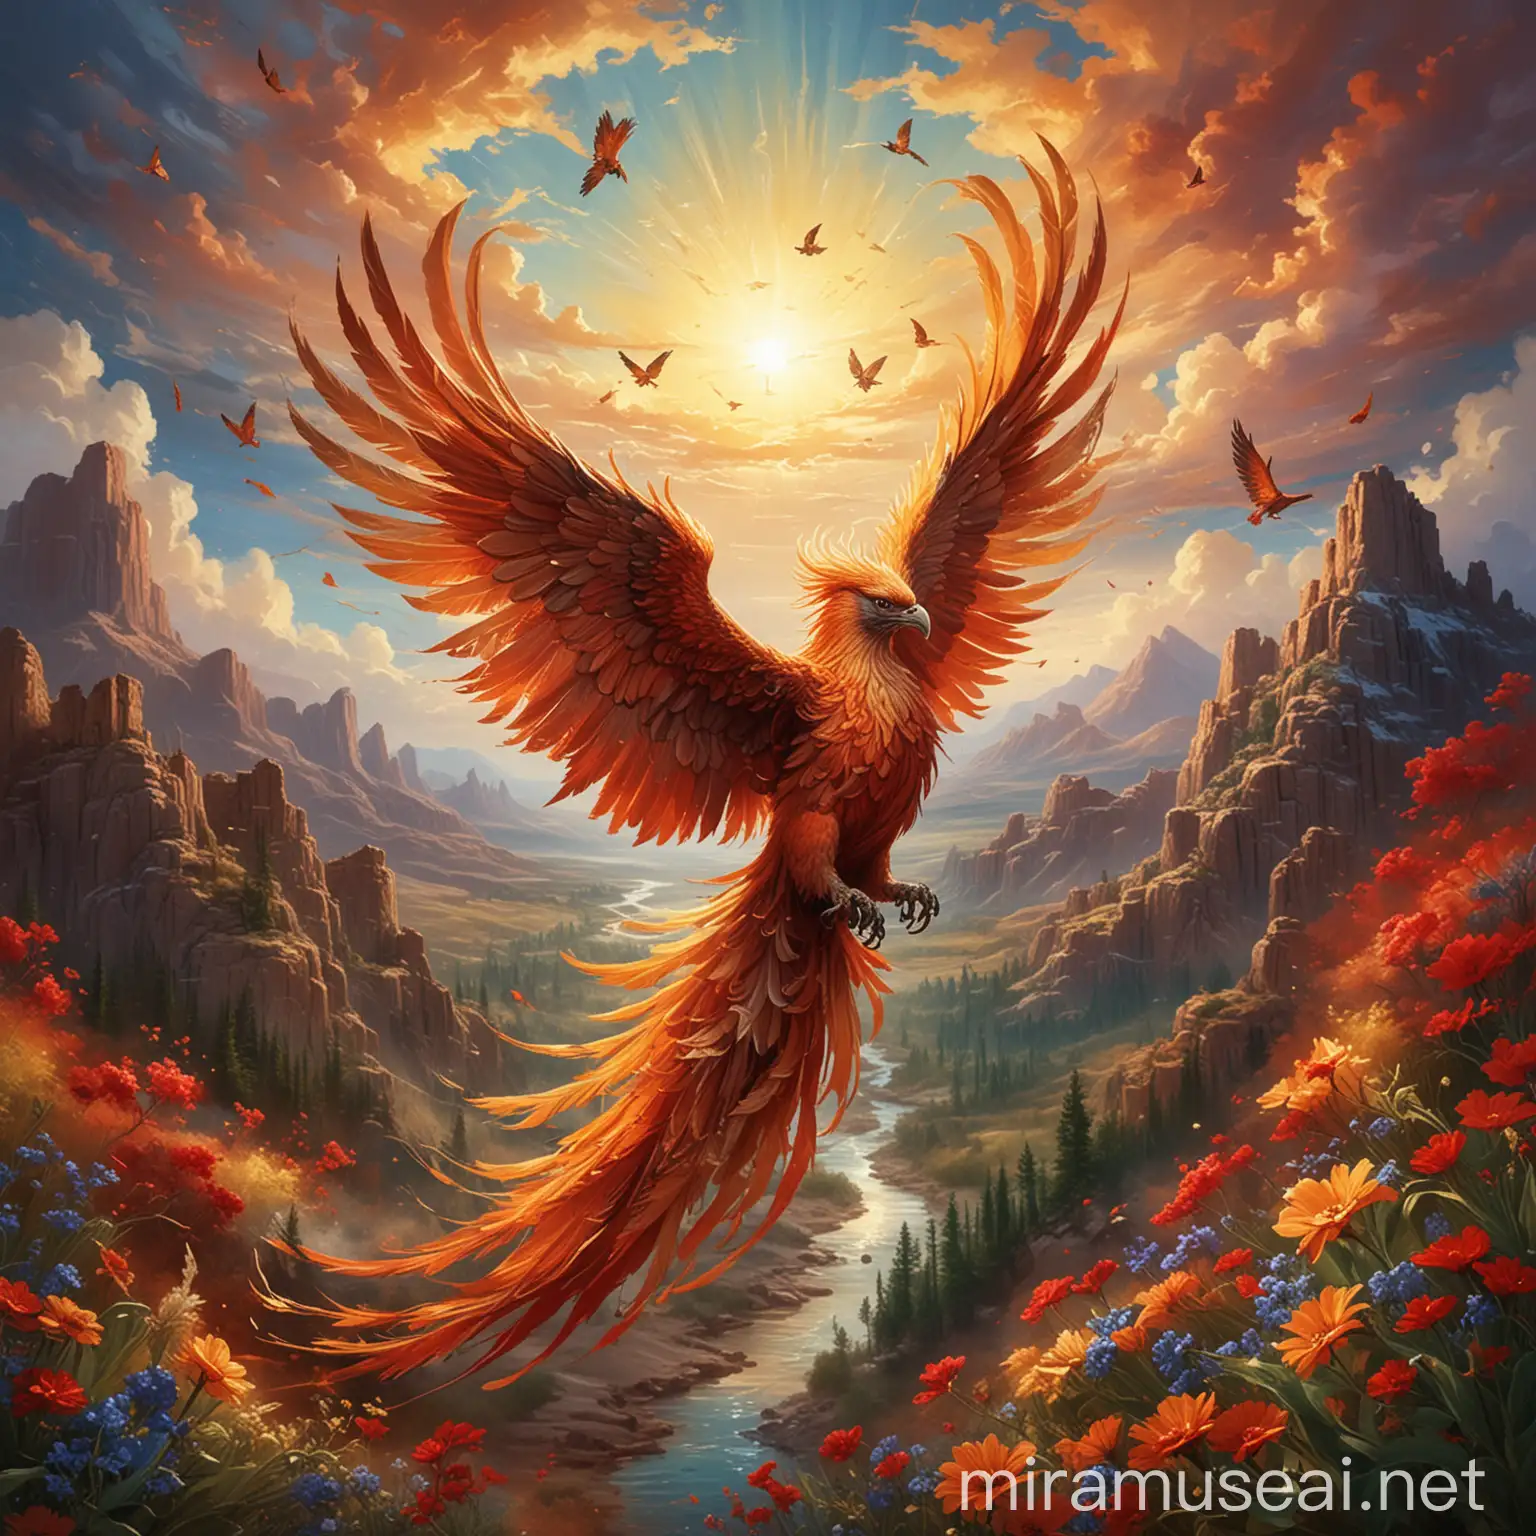 Majestic Phoenix Soaring in Fiery Triumph Symbol of Freedom and Transformation